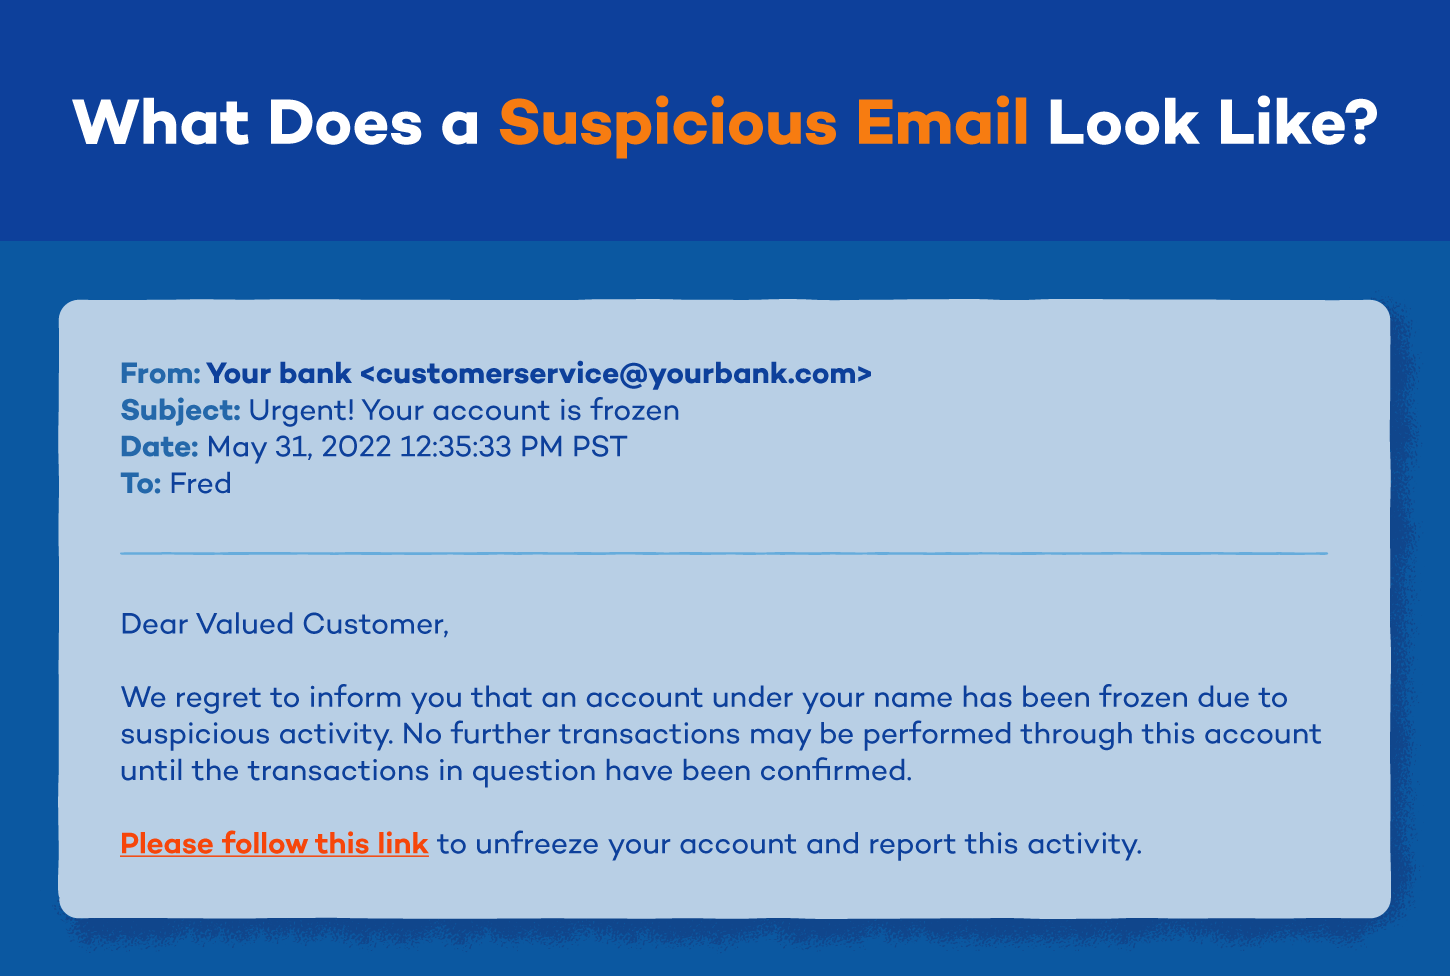 Illustration depicting what a suspicious email looks like